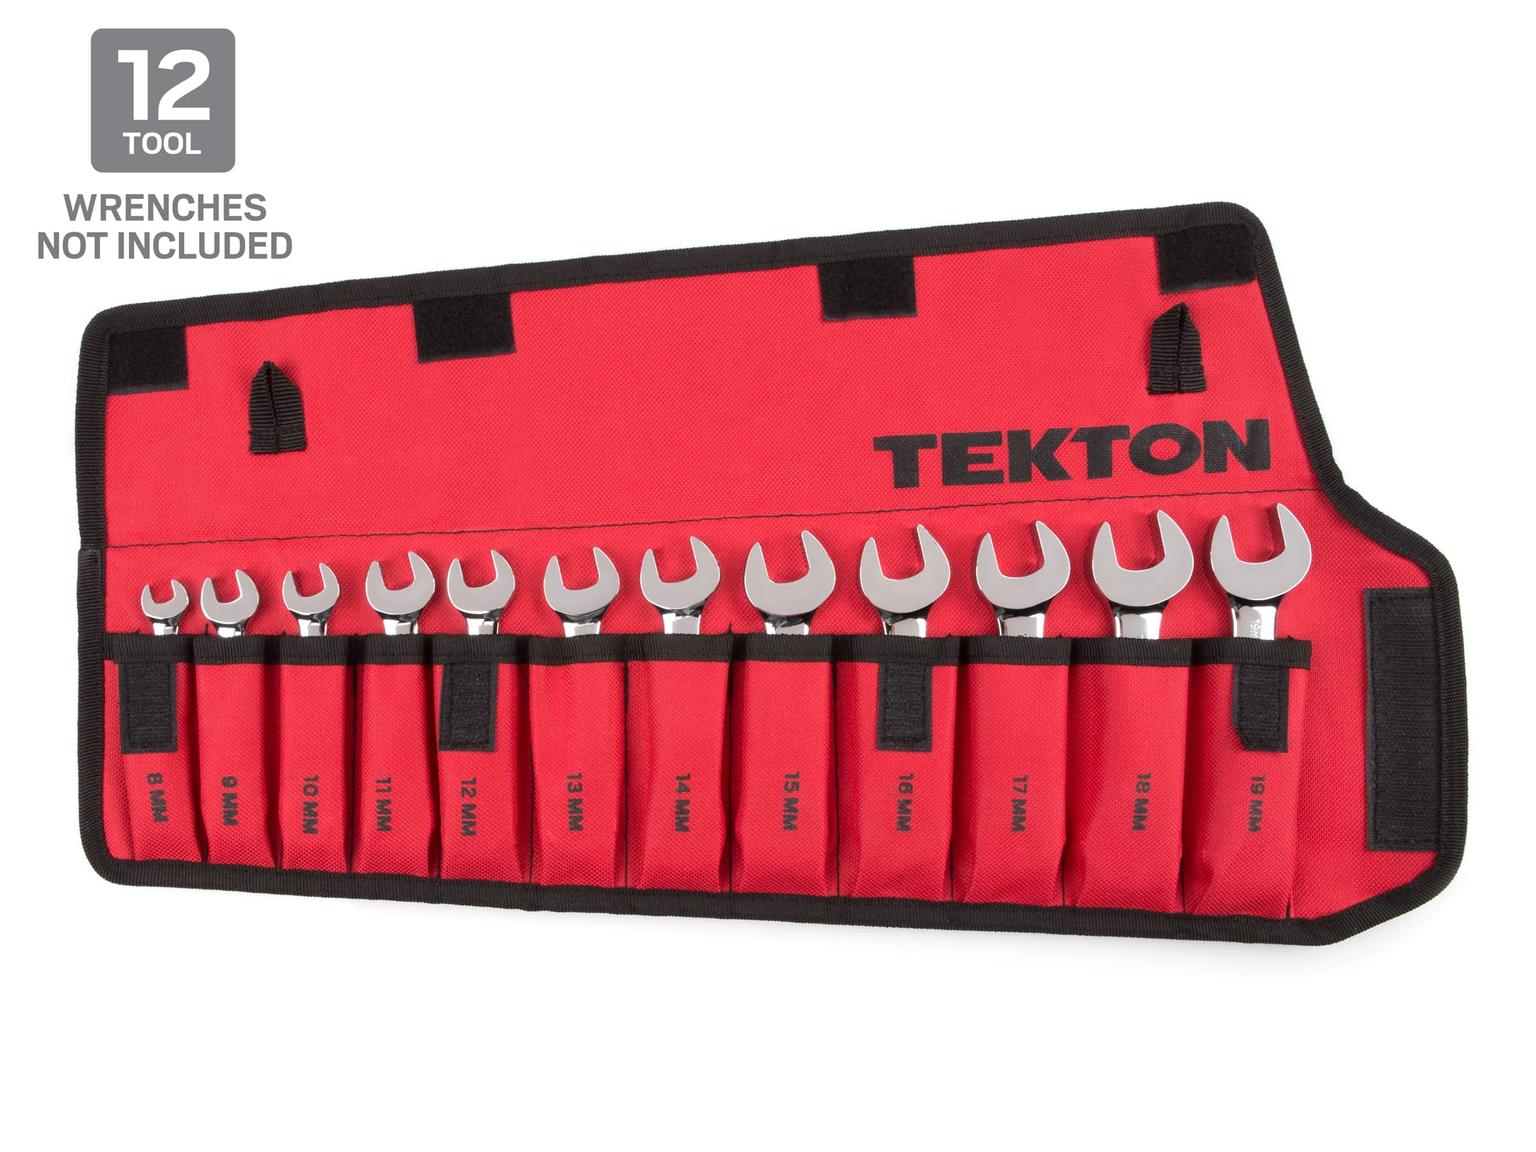 TEKTON ORG27212-T 12-Tool Stubby Combination Wrench Pouch (8-19 mm)